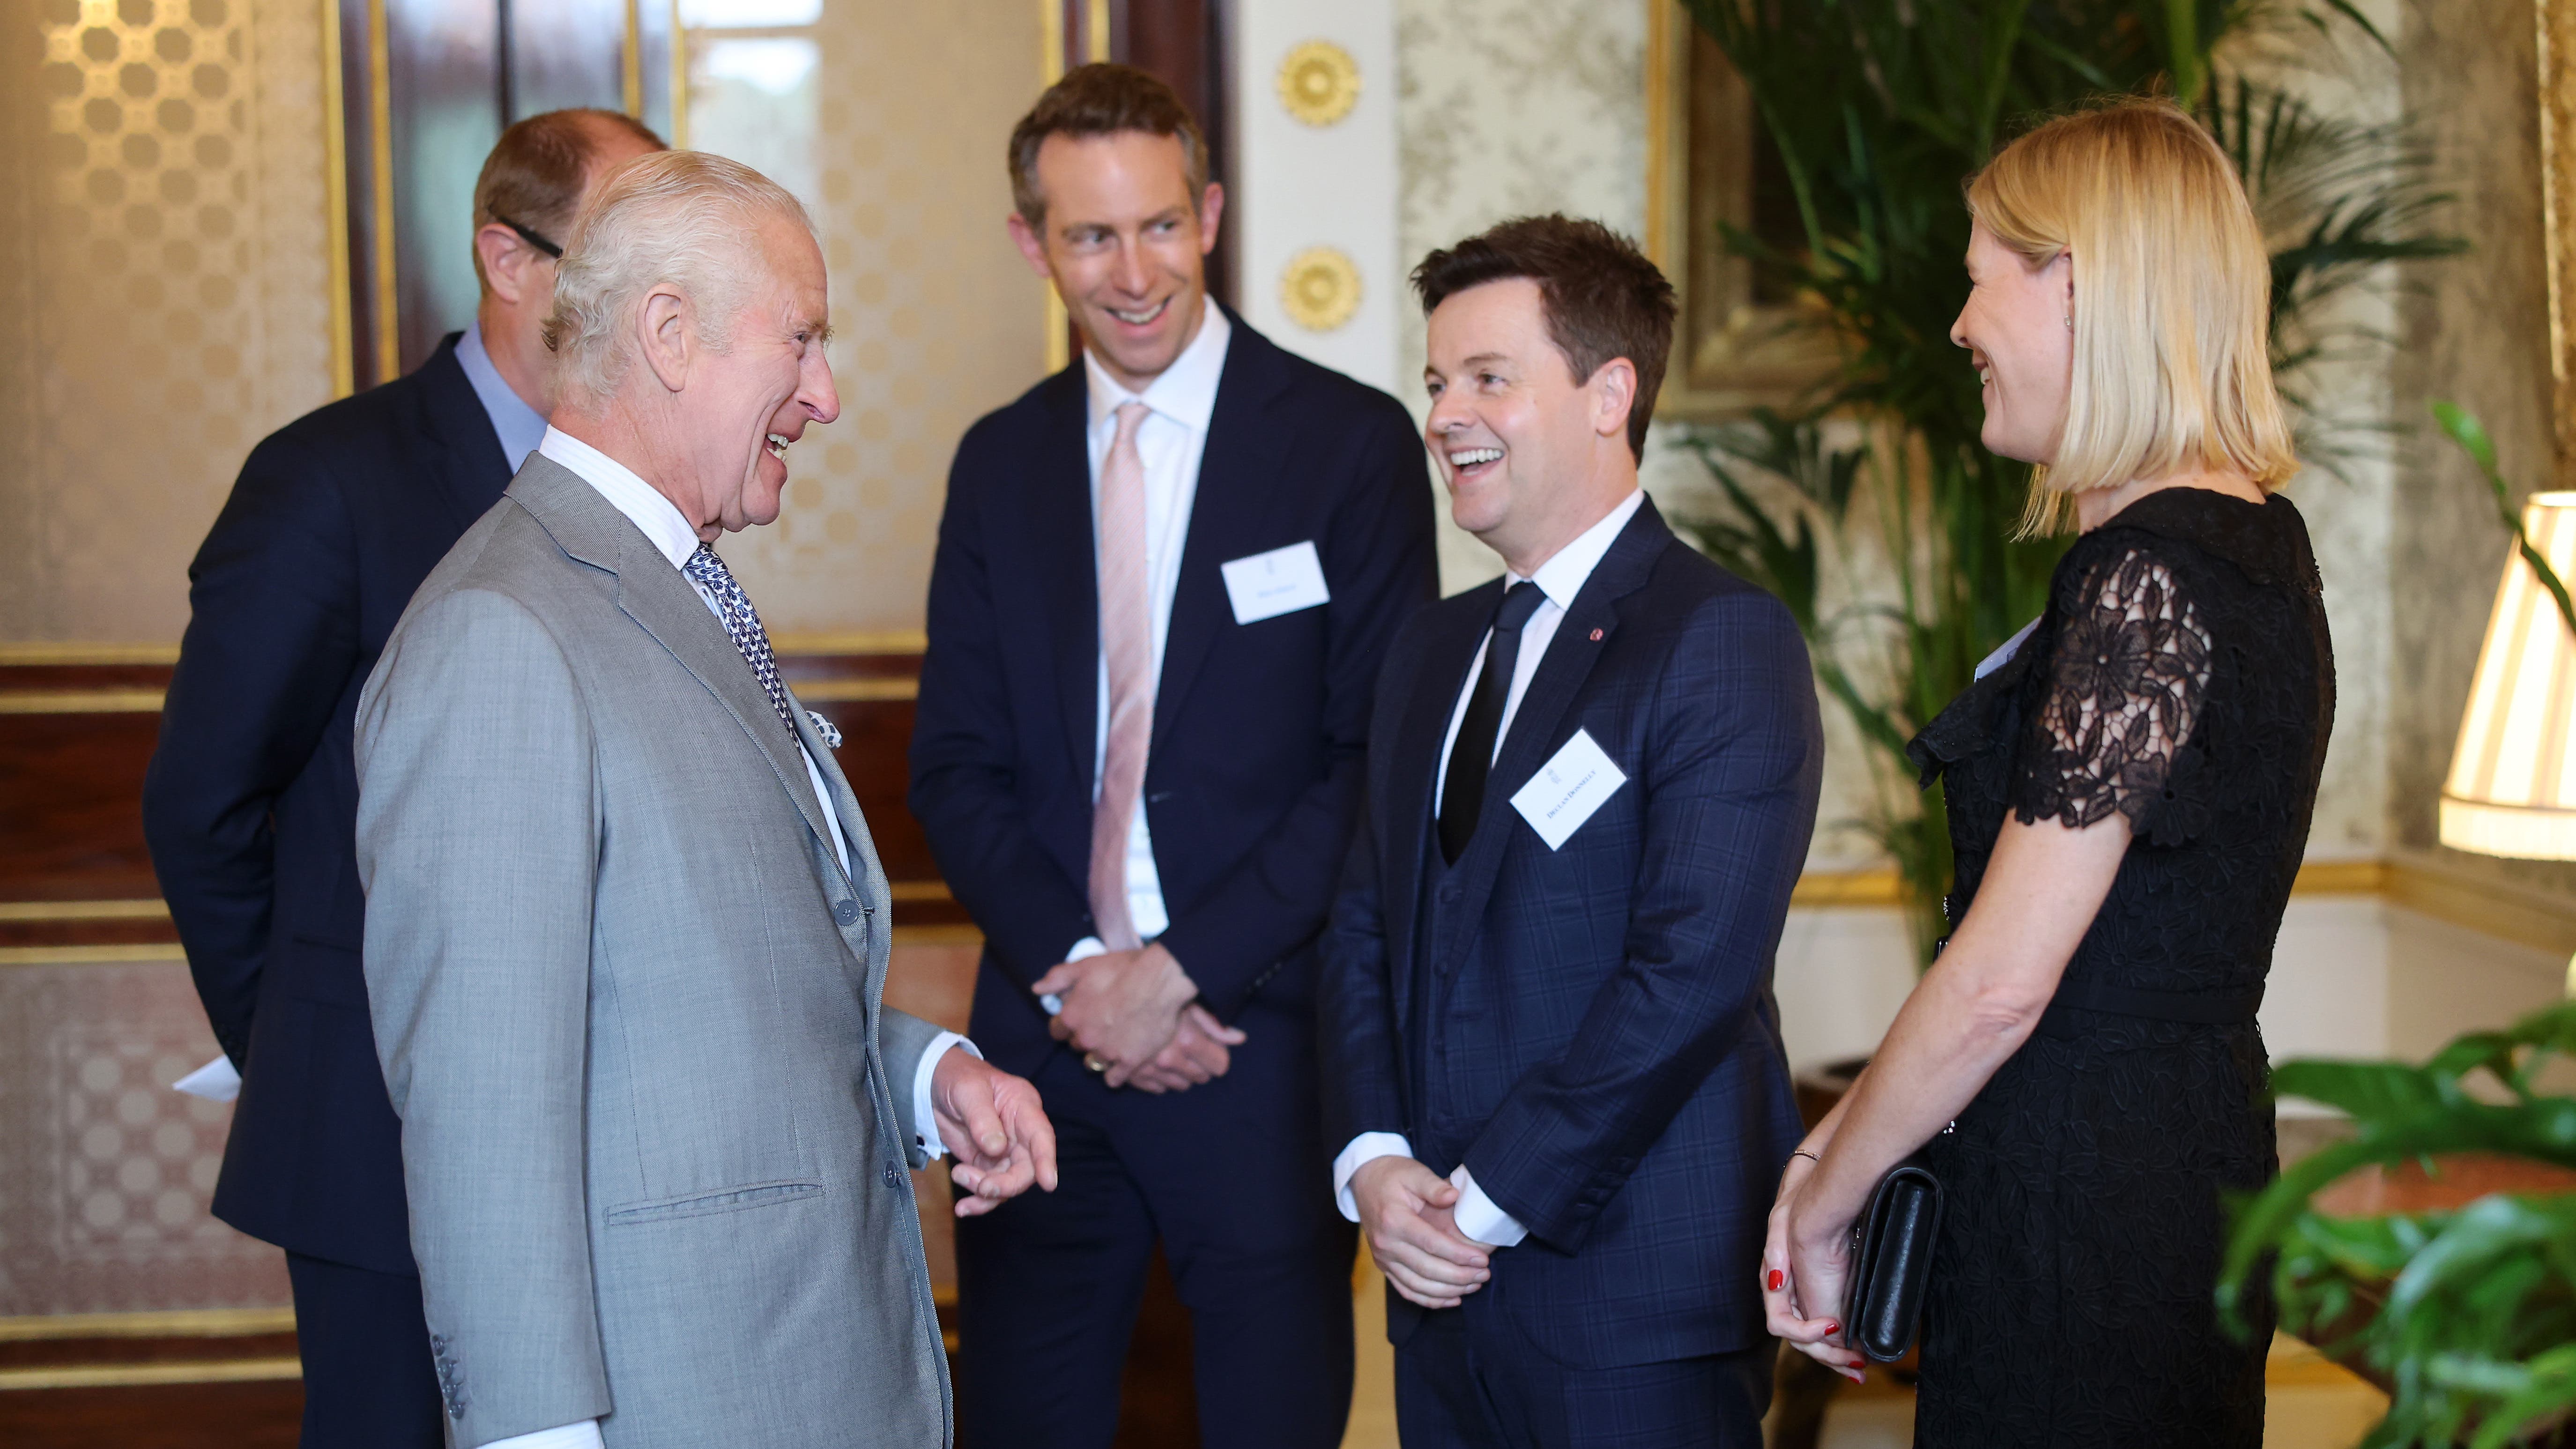 ‘He was at home breastfeeding’: Dec tells King why Ant missed Palace reception